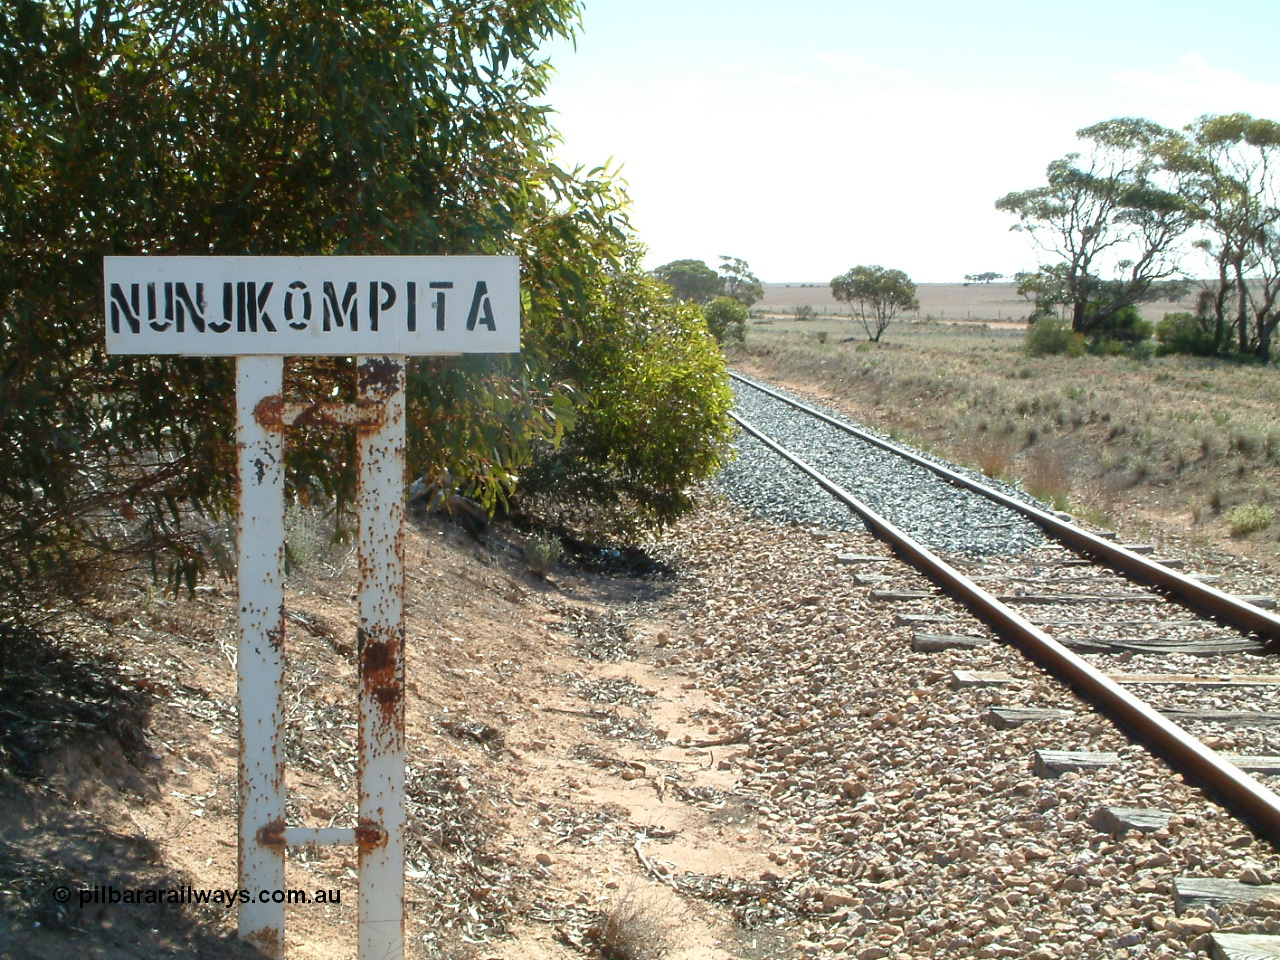 030411 142235
Nunjikompita, yard or station location sign, located about a kilometre out from the actual location. Fresh ballast is on the line.
